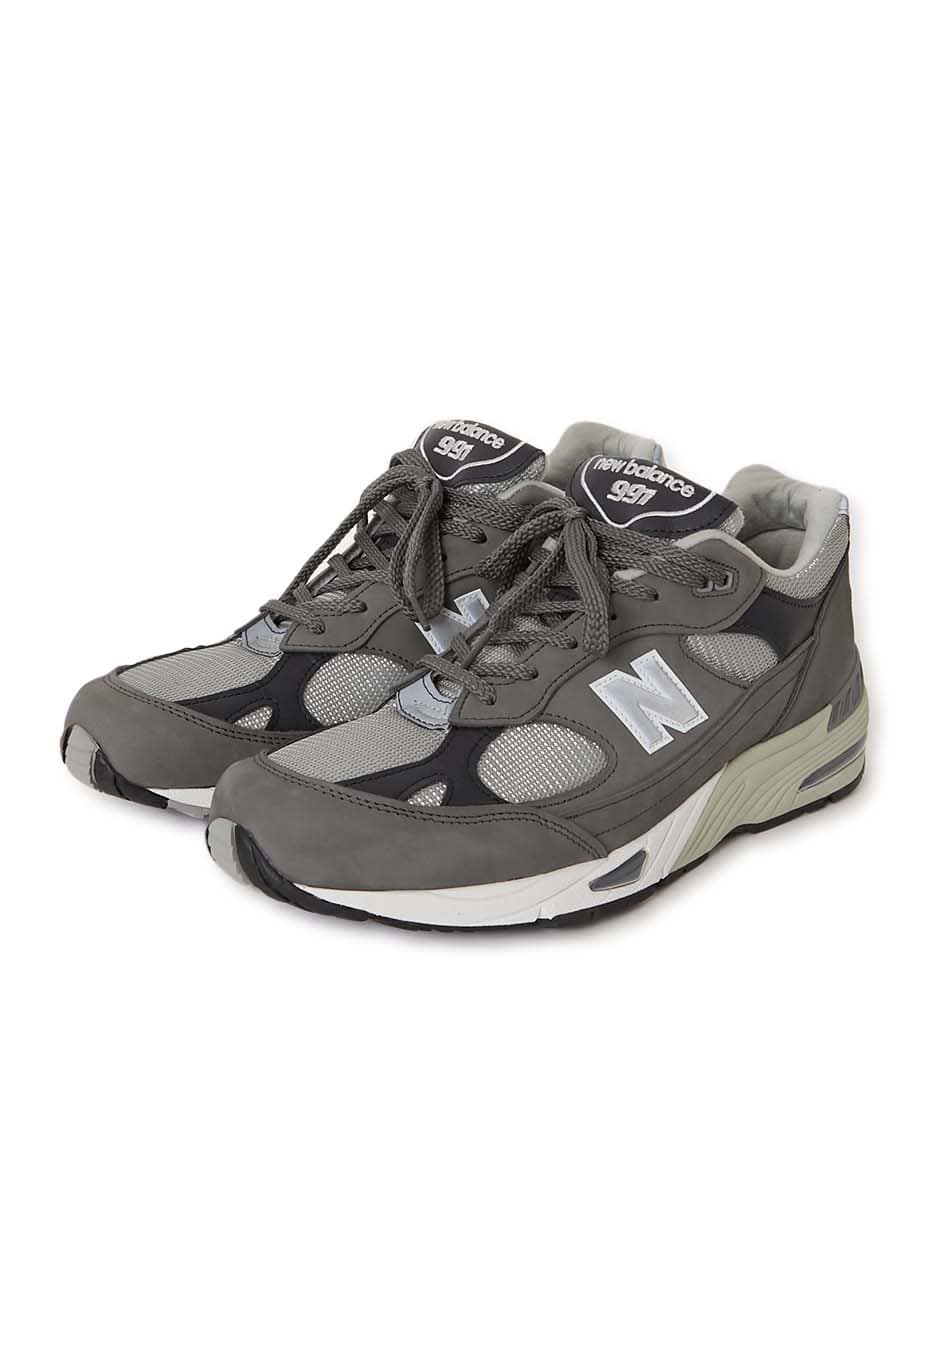 NEW BALANCE M991 GNS MADE IN UK SHOES